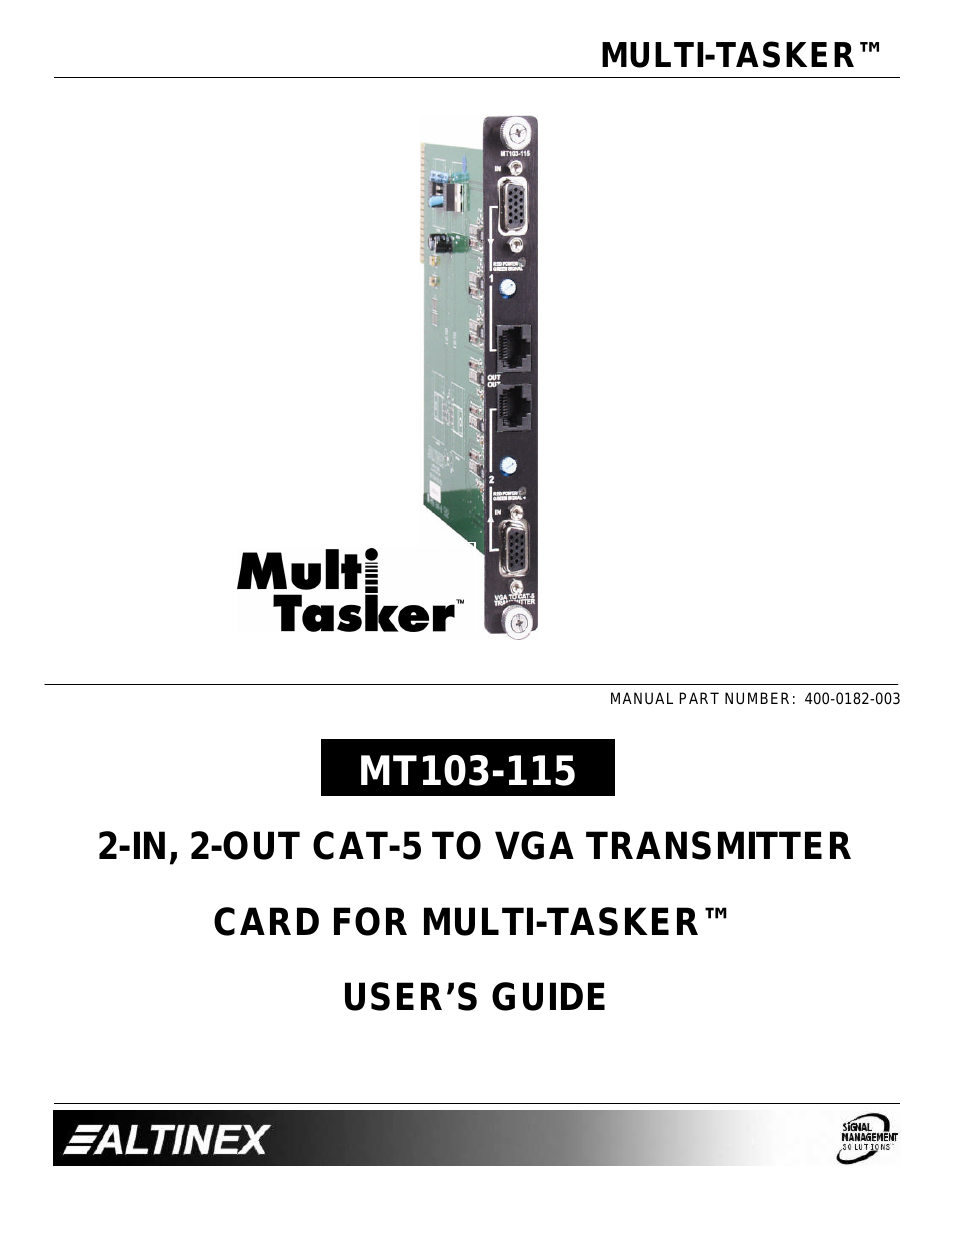 VGA to CAT-5 Transmitter Card MT103-115 (Page 1)